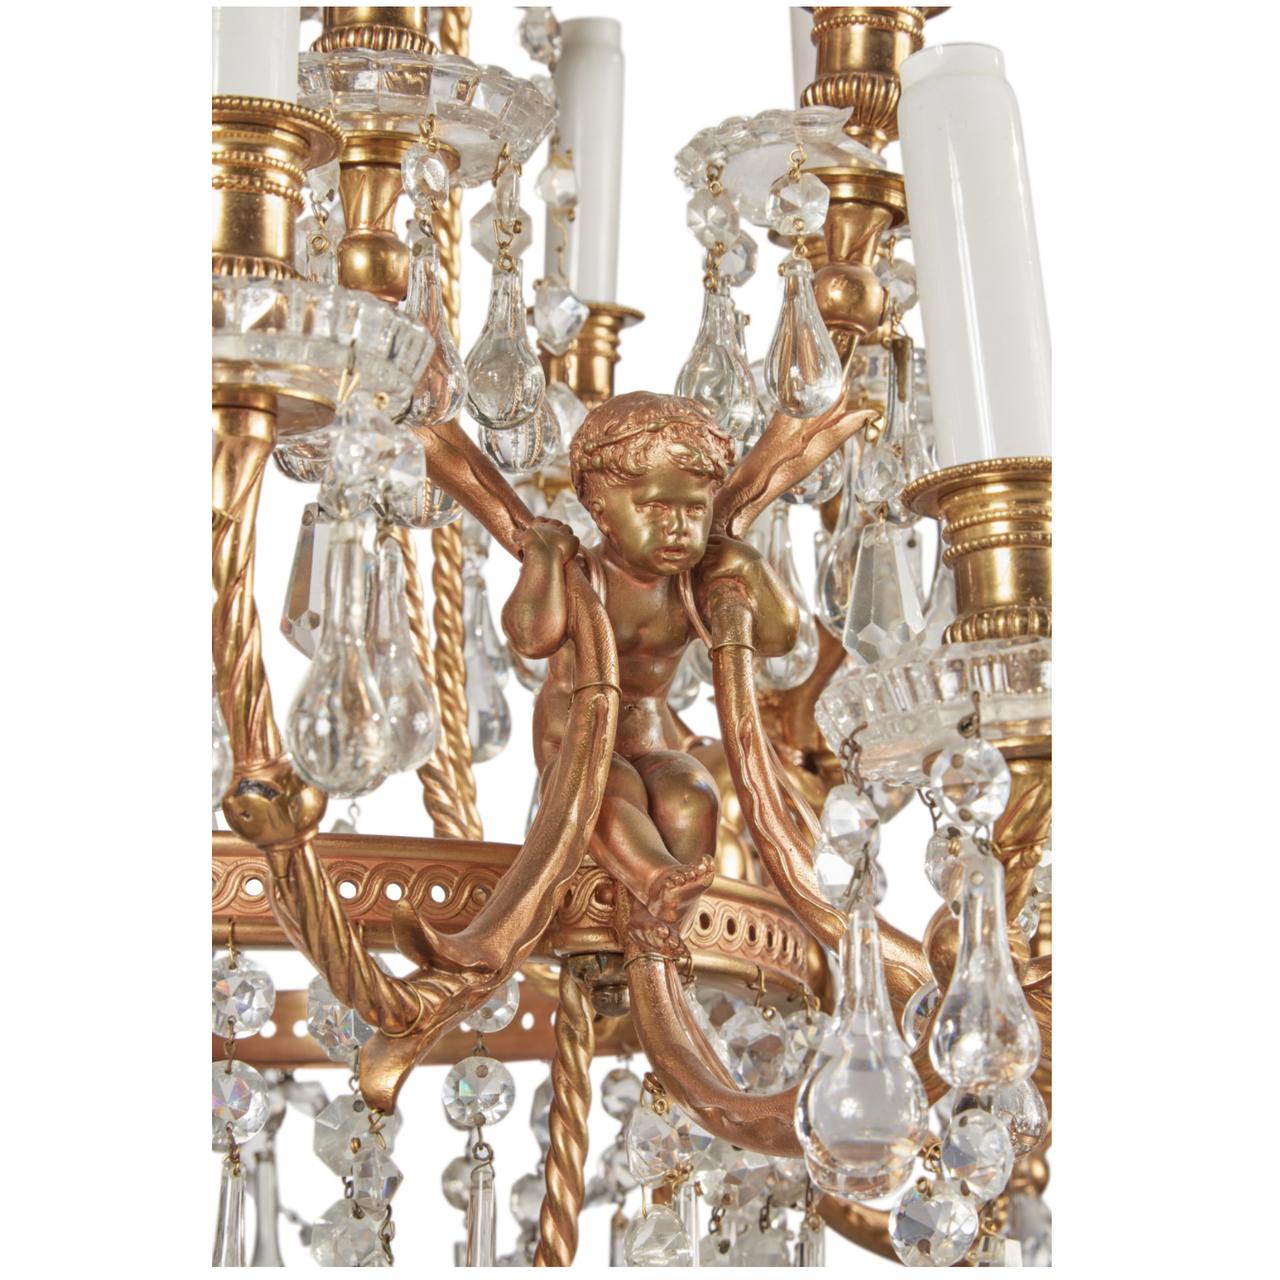 French Chandelier by Baccarat, Circa 1900